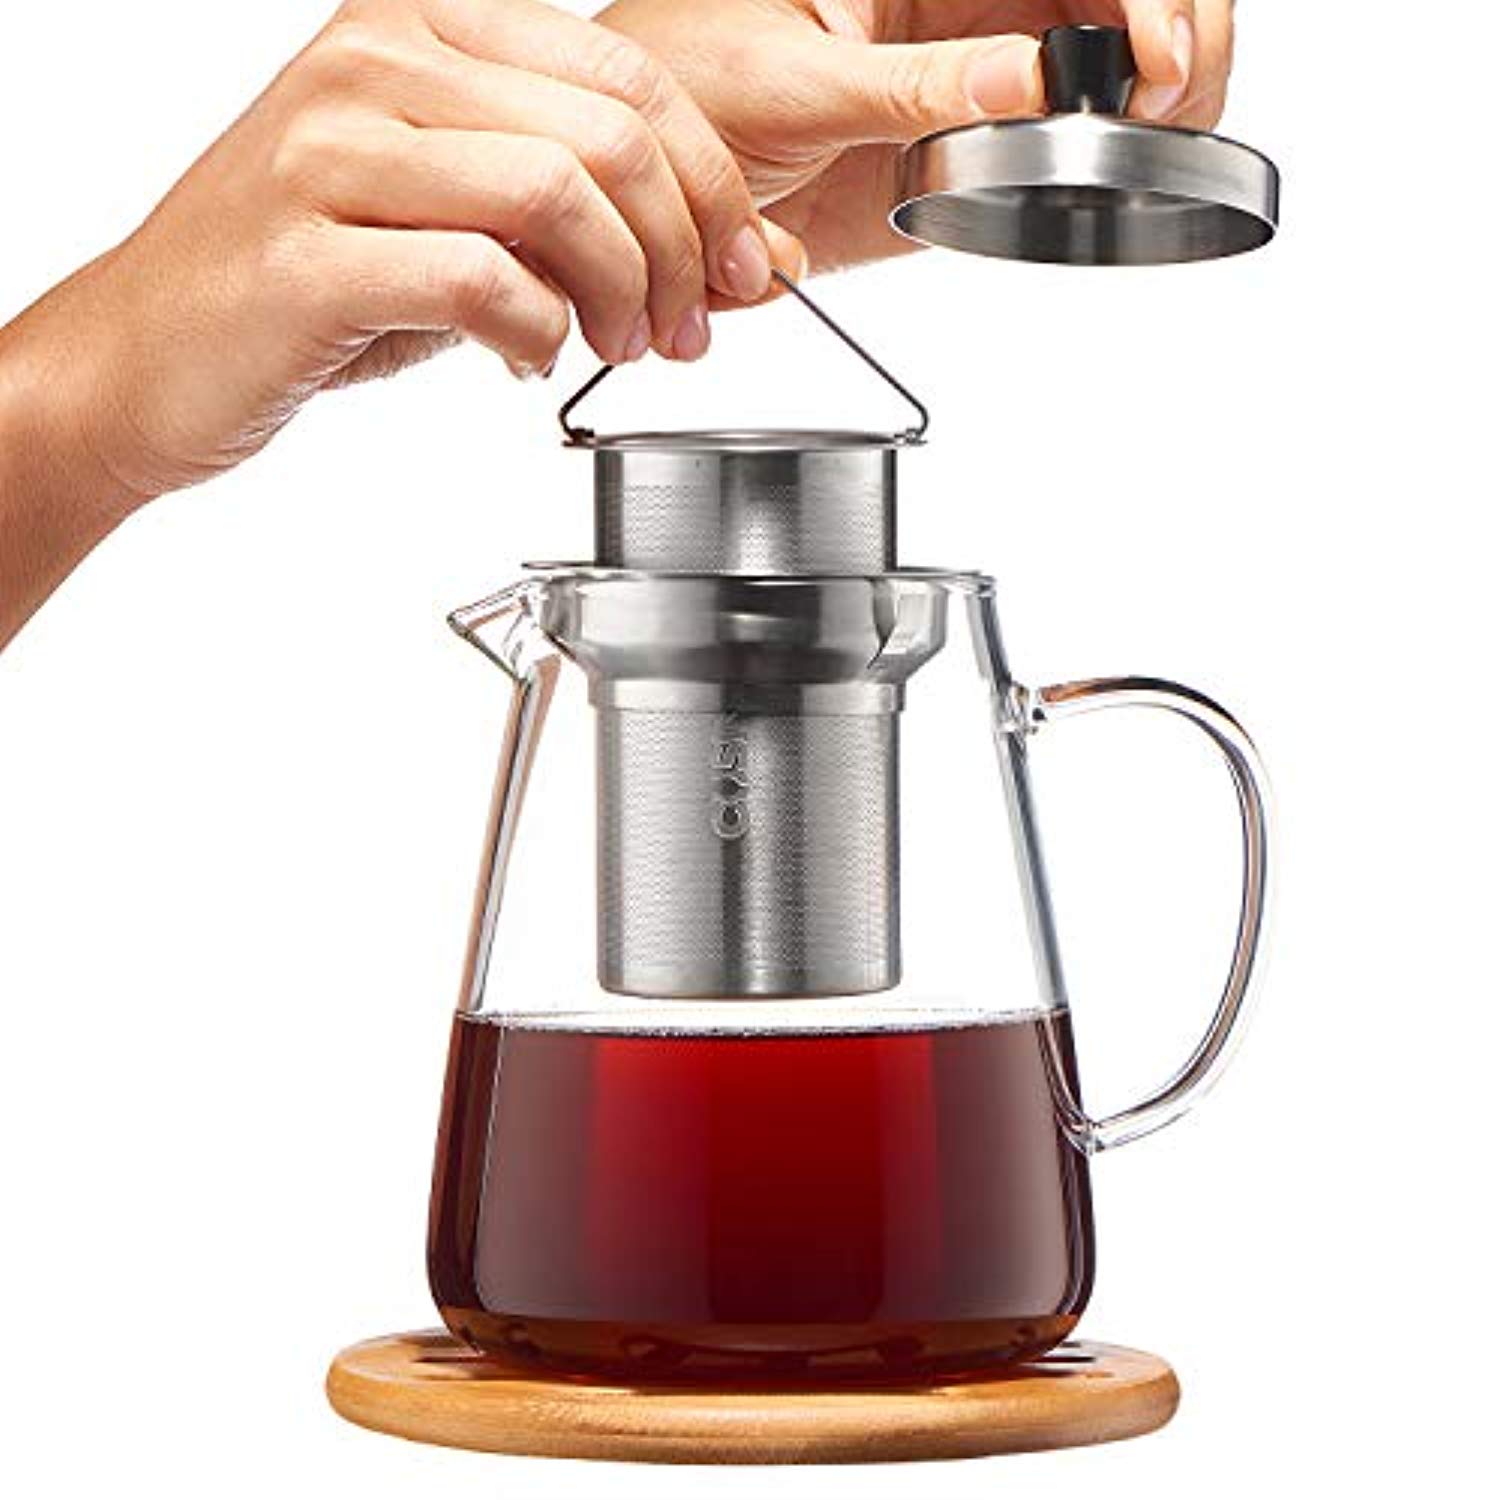 Waves Glass Teapot with Infuser